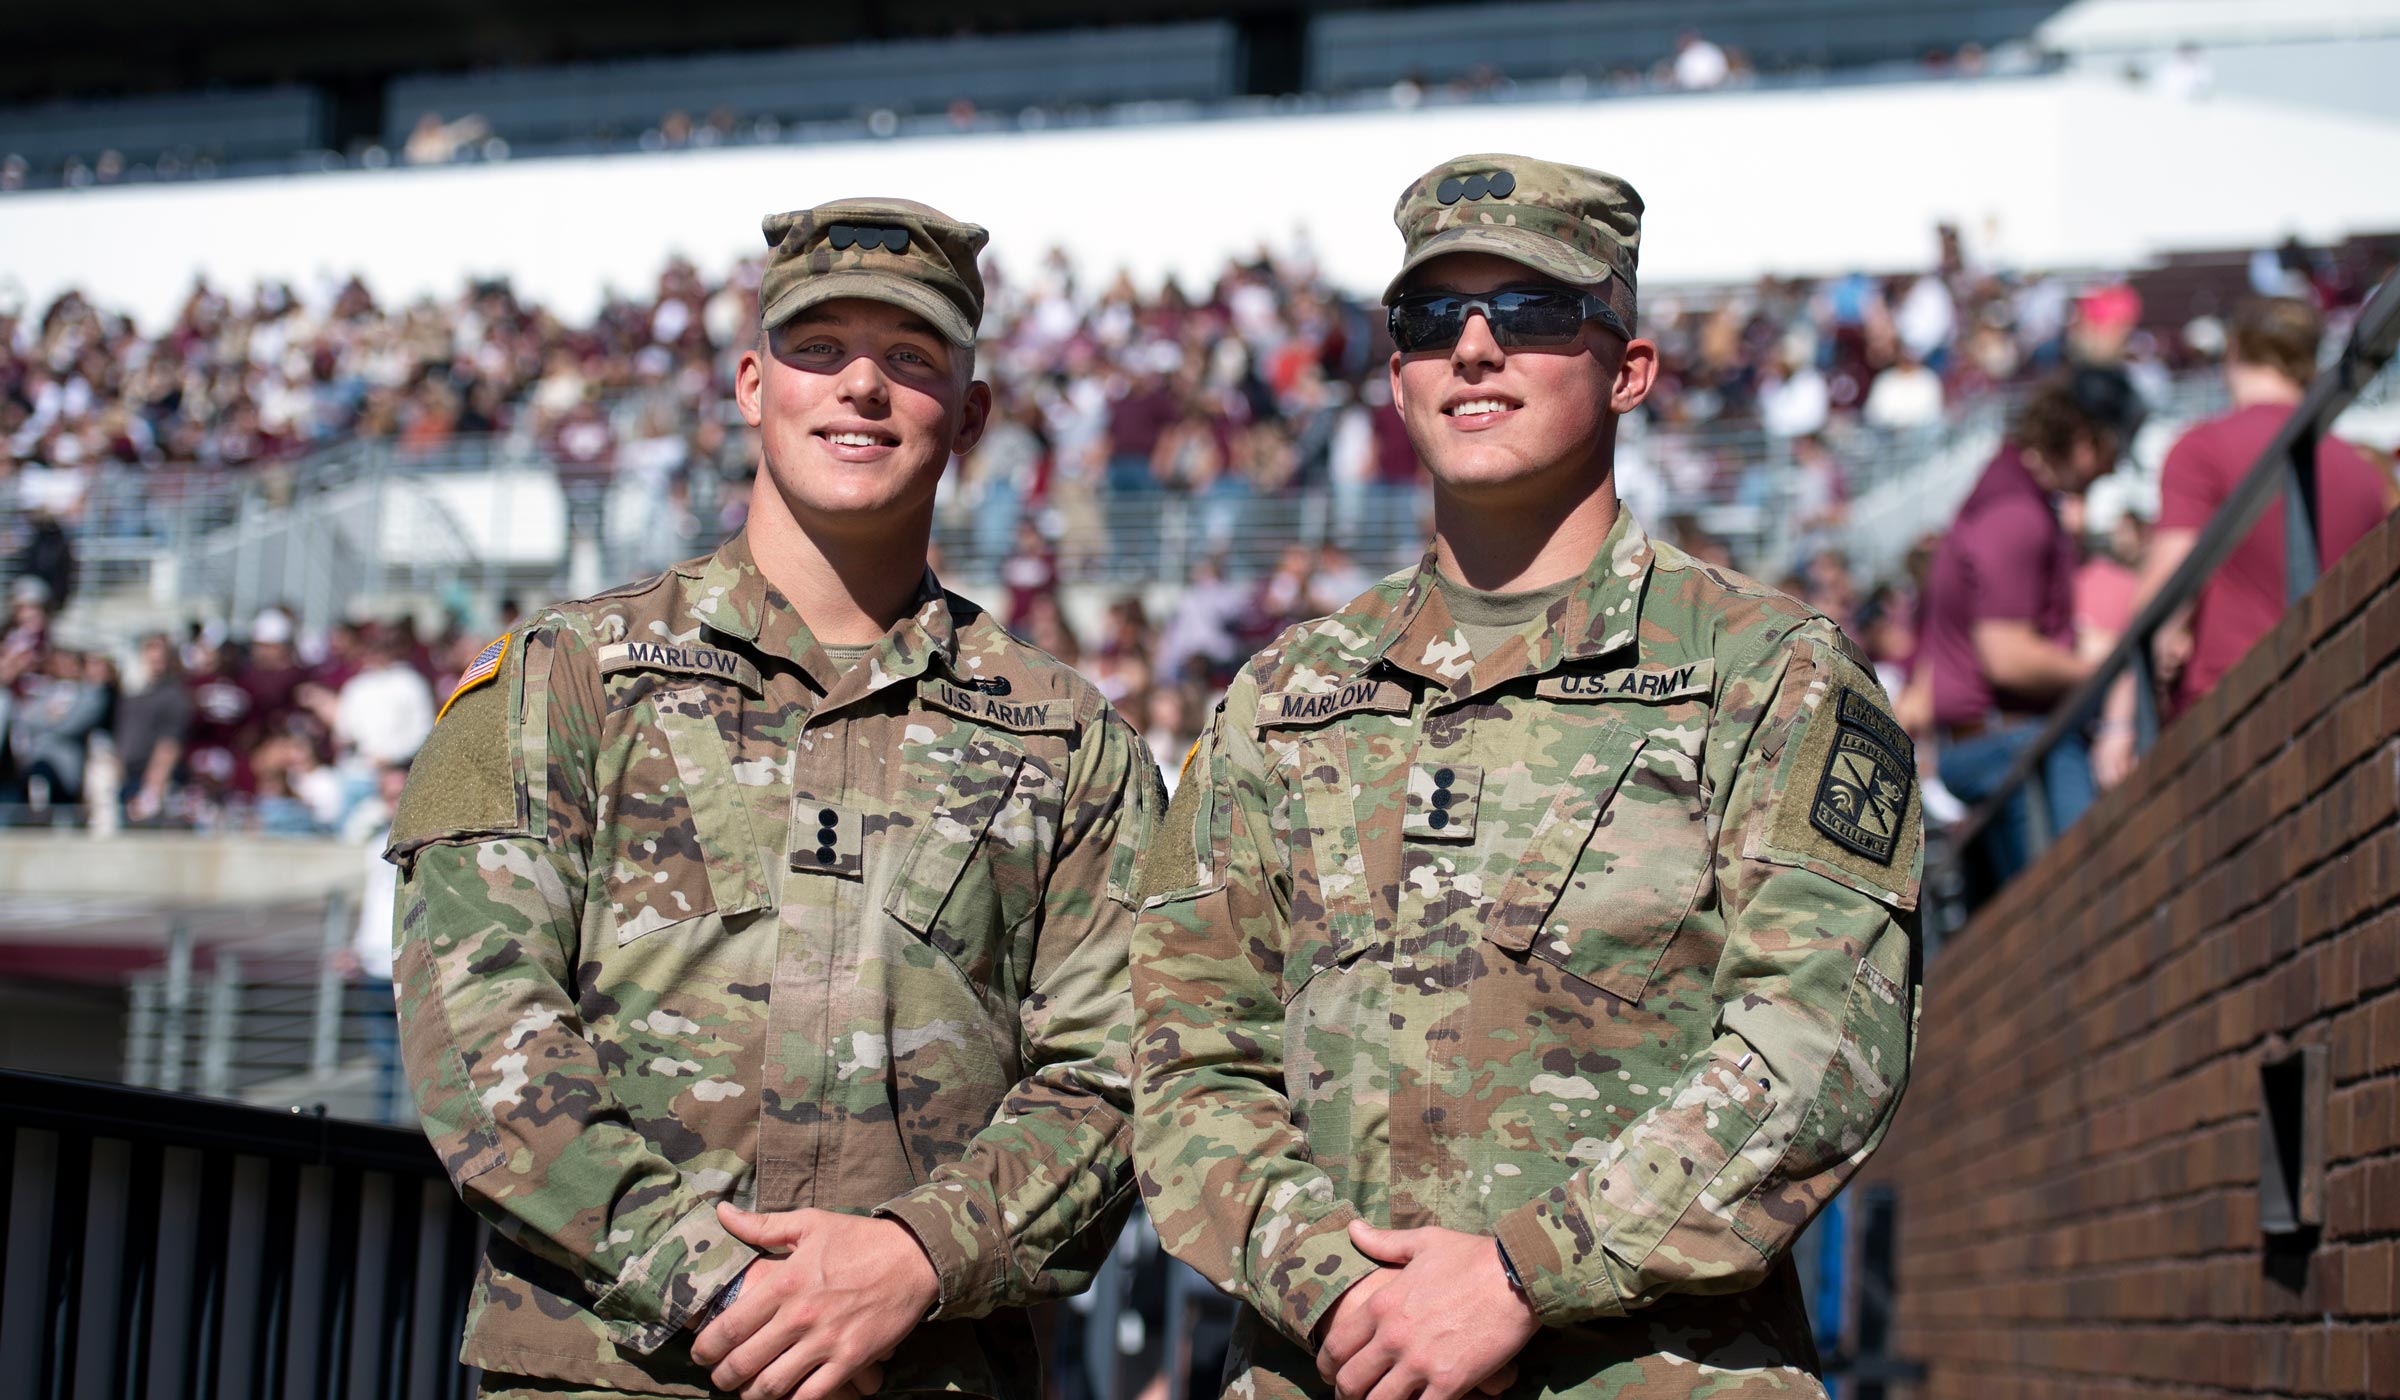 Colby and Cade Marlow, pictured in ARMY ROTC uniforms at an MSU football game.